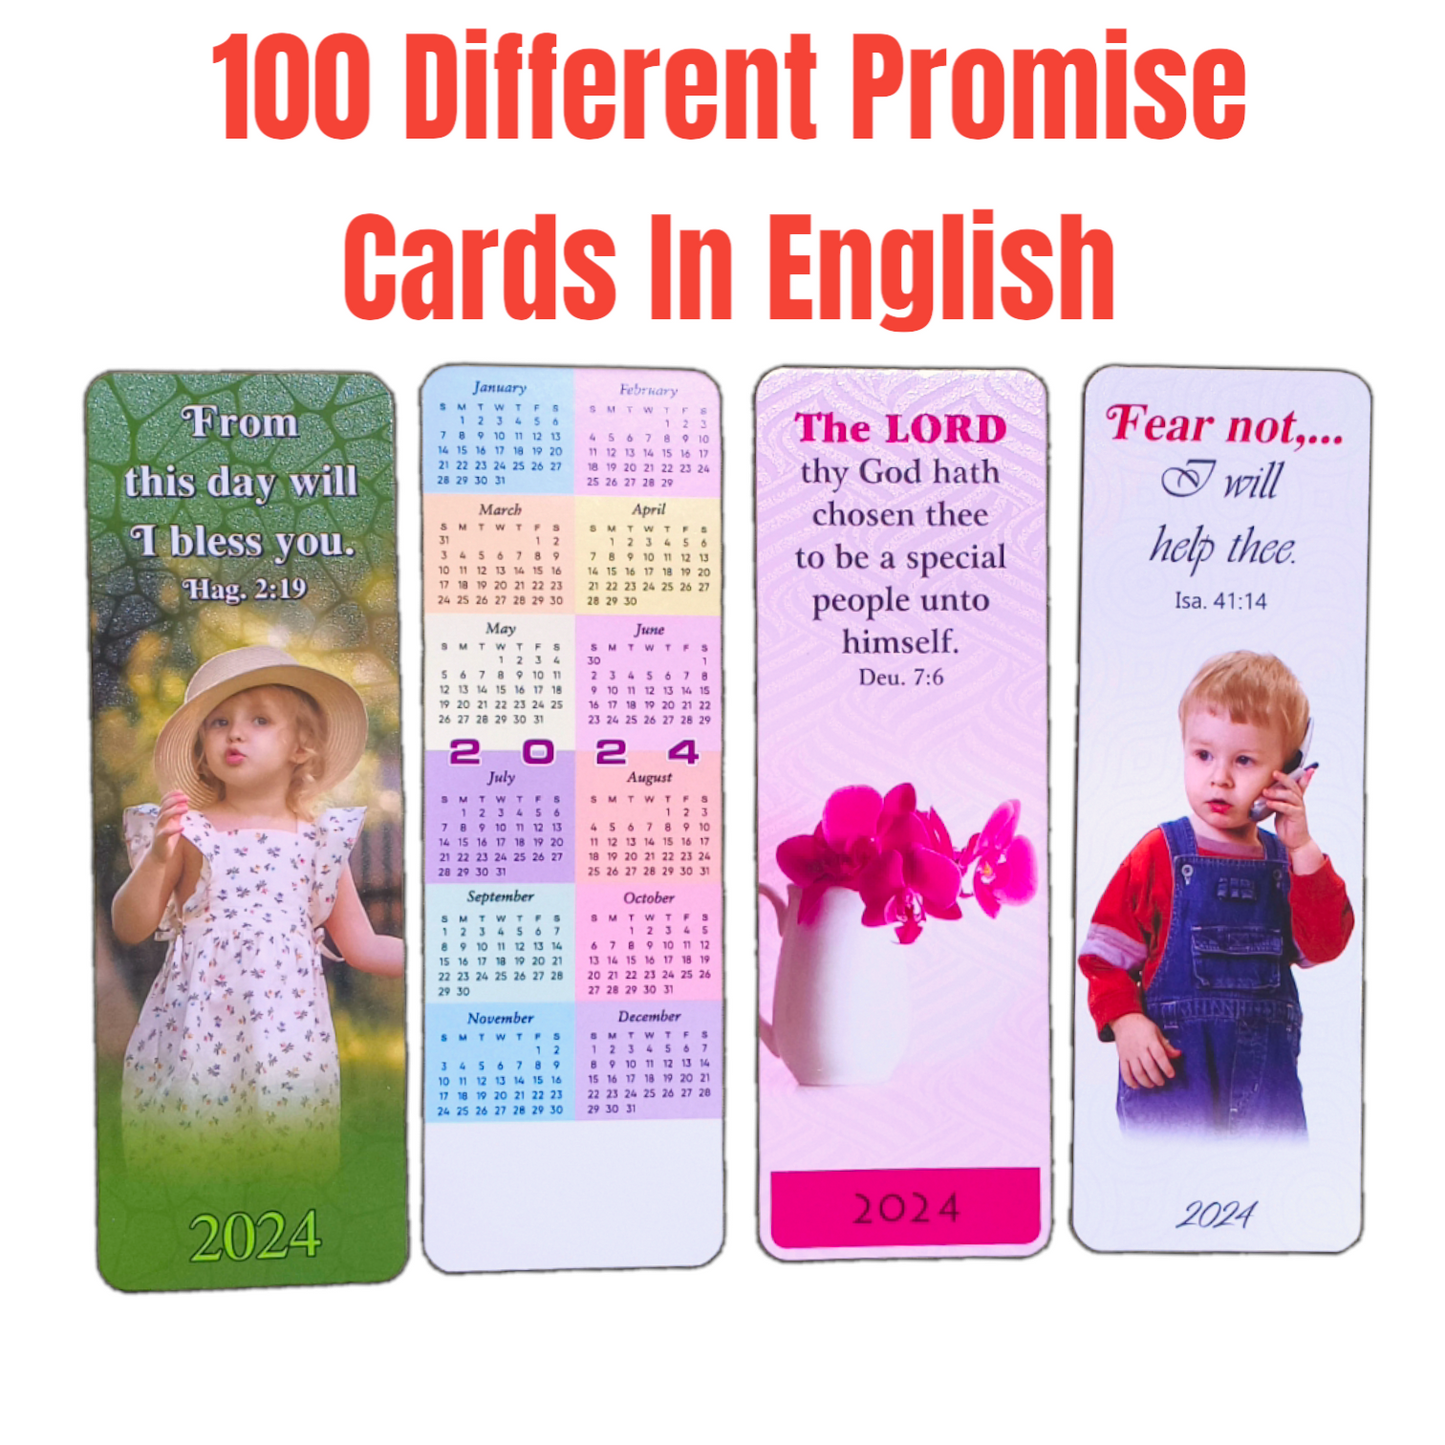 2024 Promise Cards | 100 Different Promise Cards In English